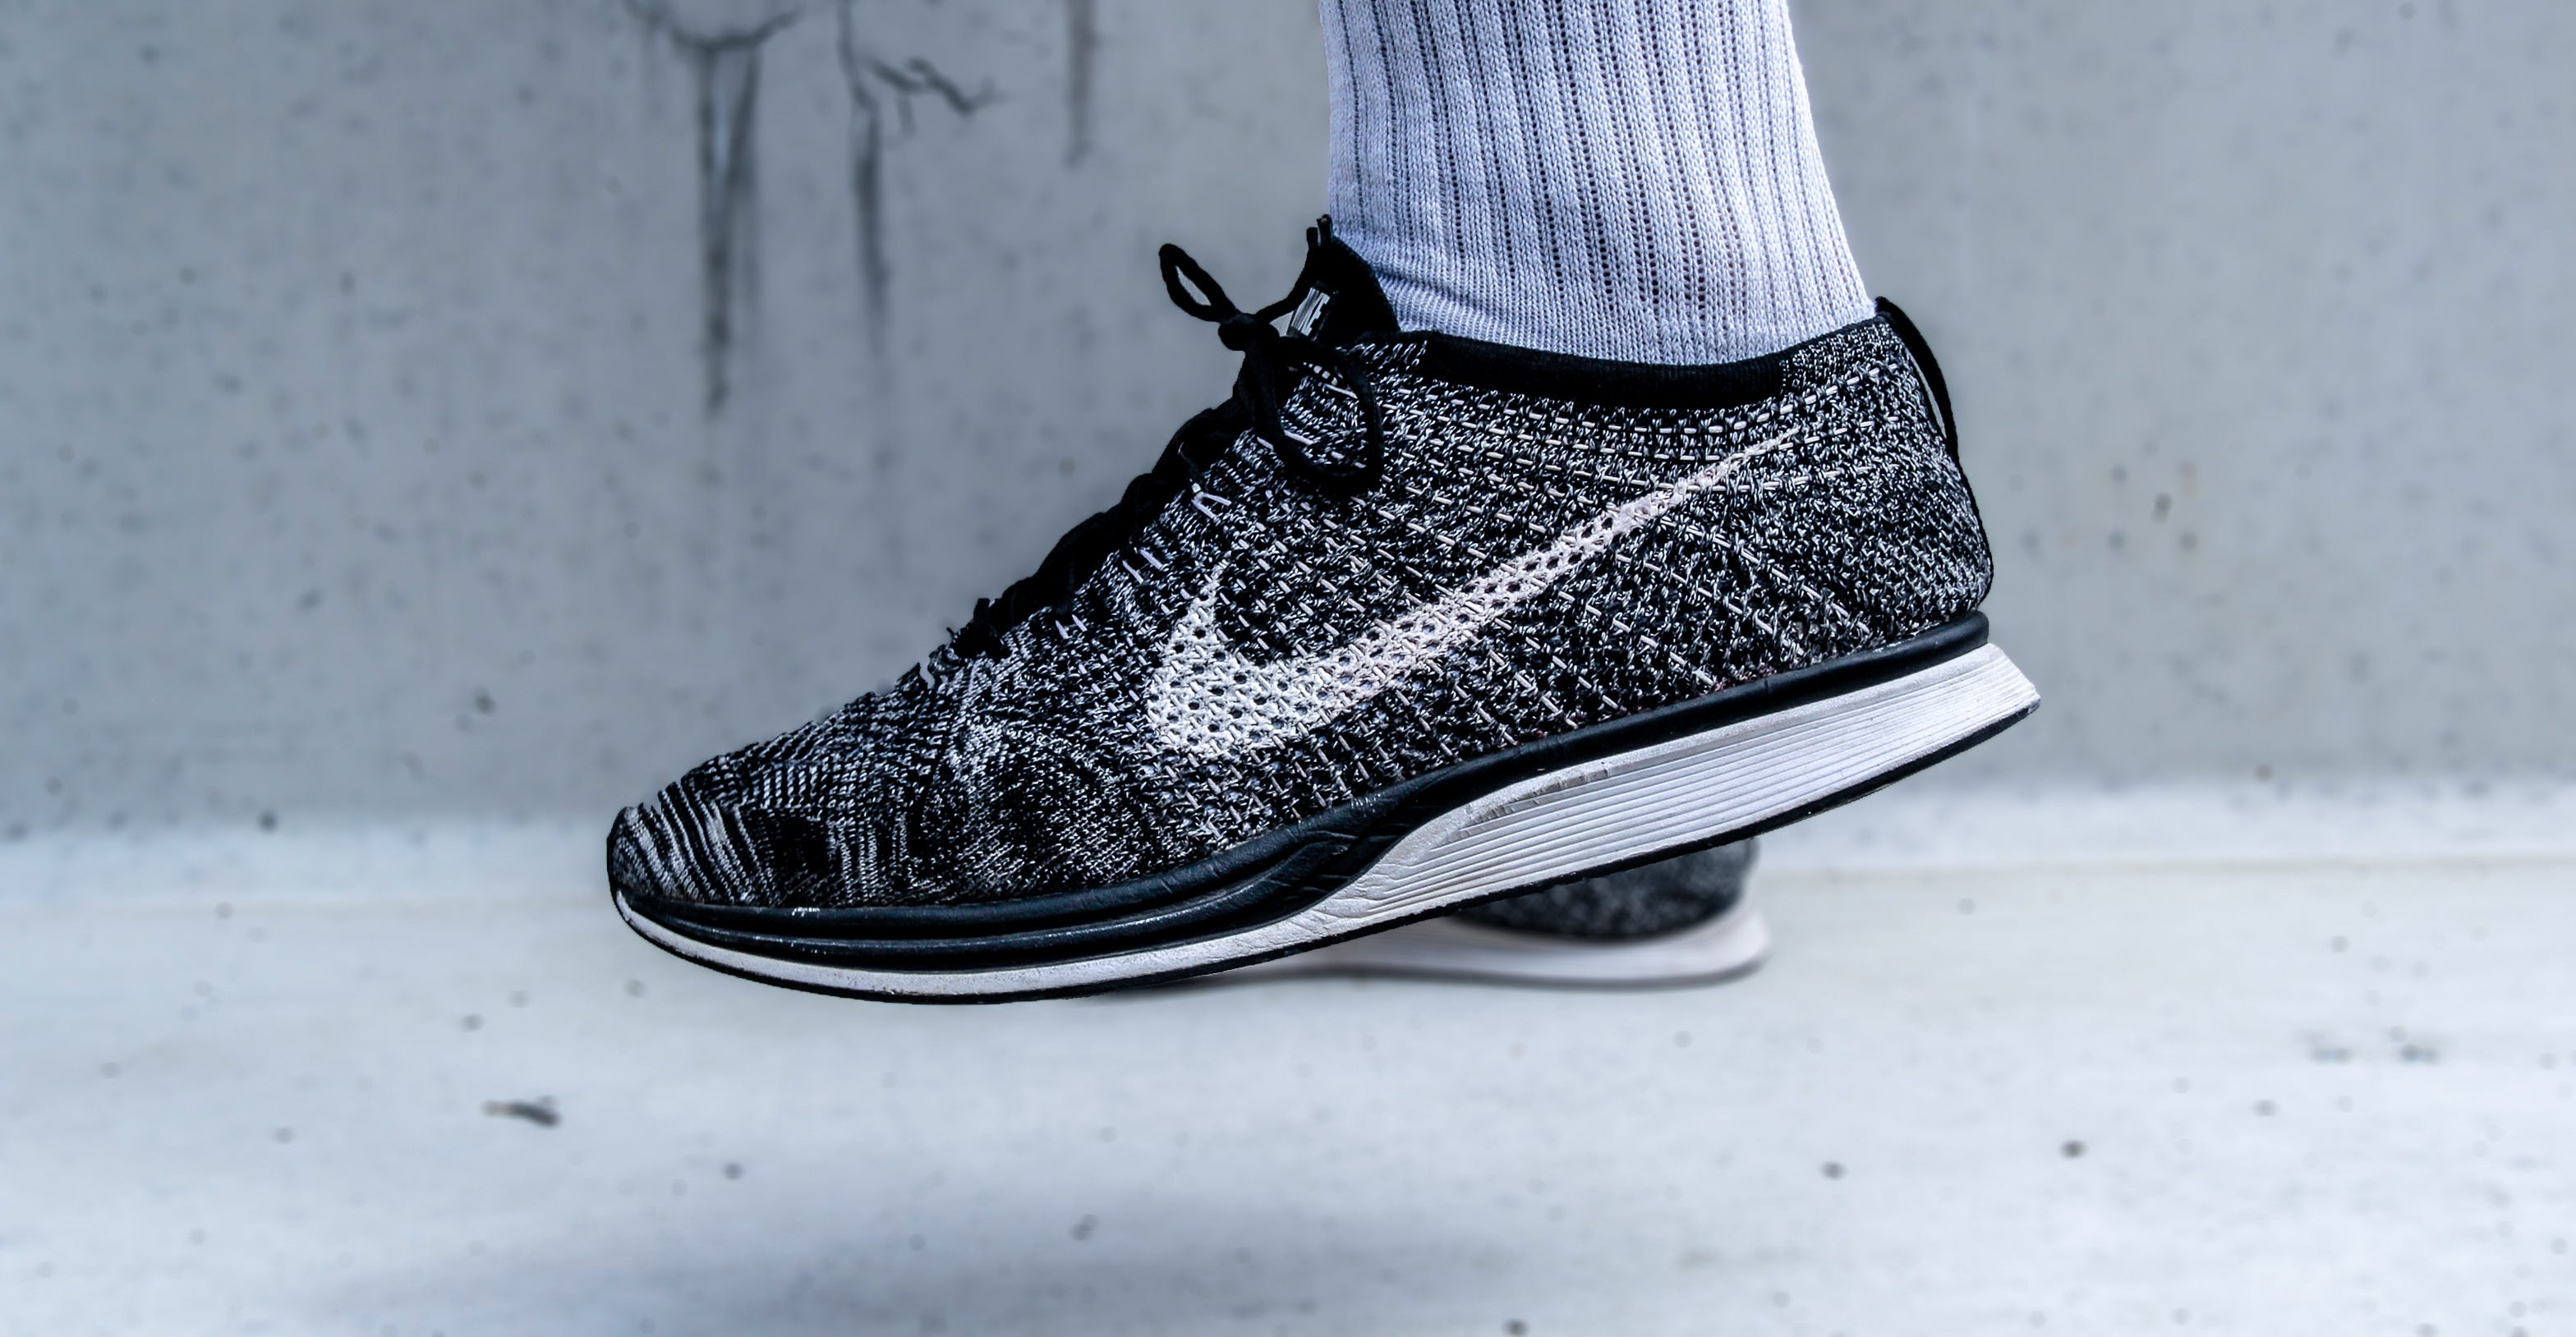 The revolutionary Nike Flyknit technology | by The Sneakulture | Medium